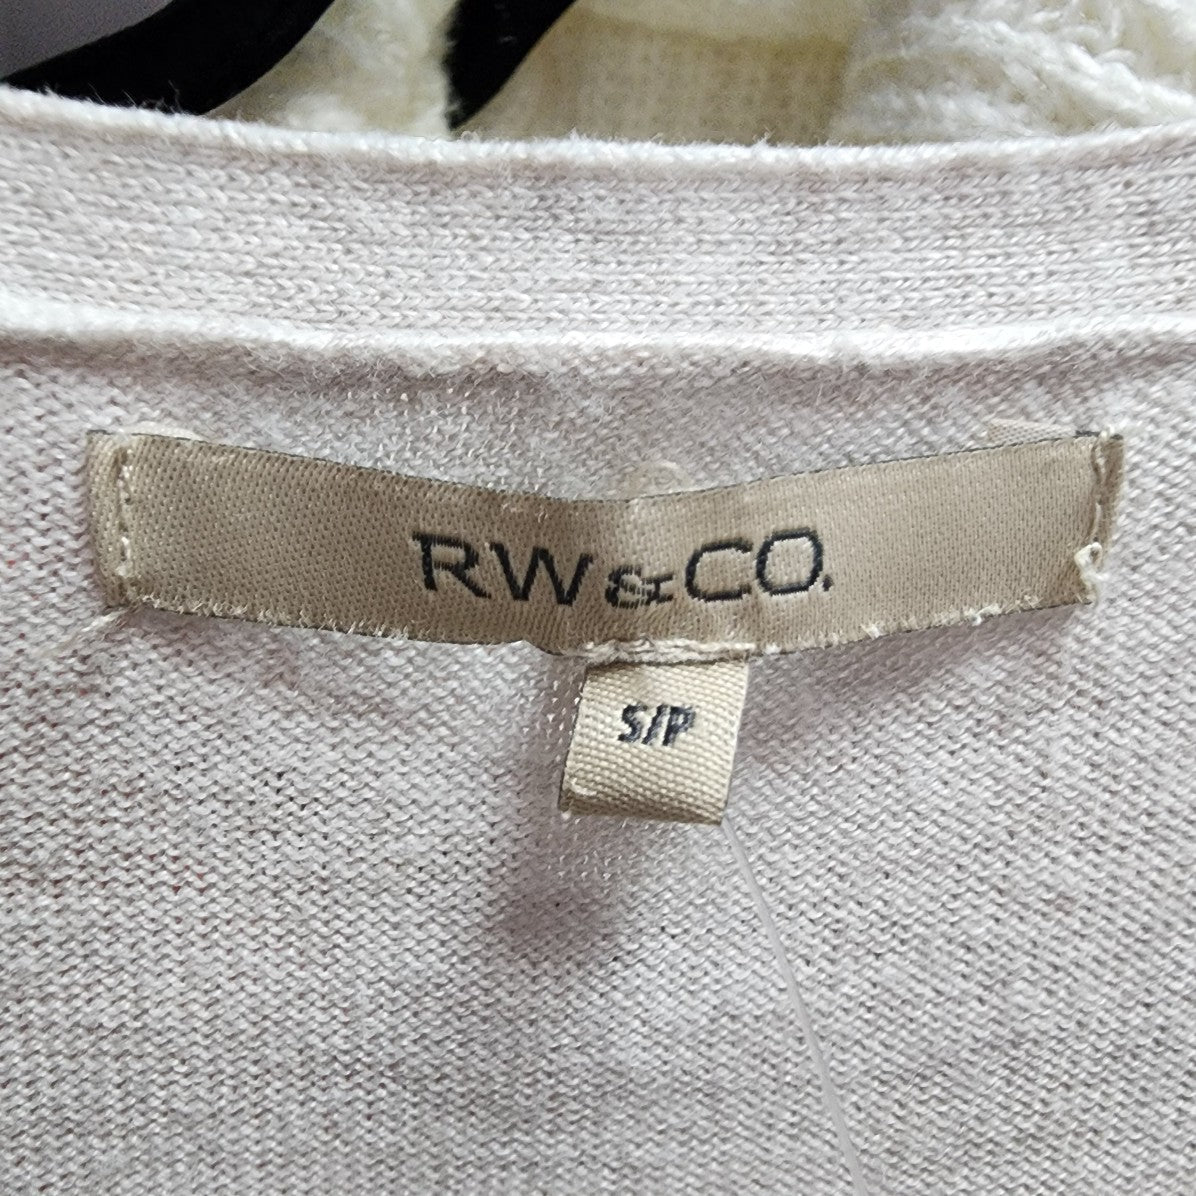 RW&CO Grey Knit Cotton Blend Sweater Size S